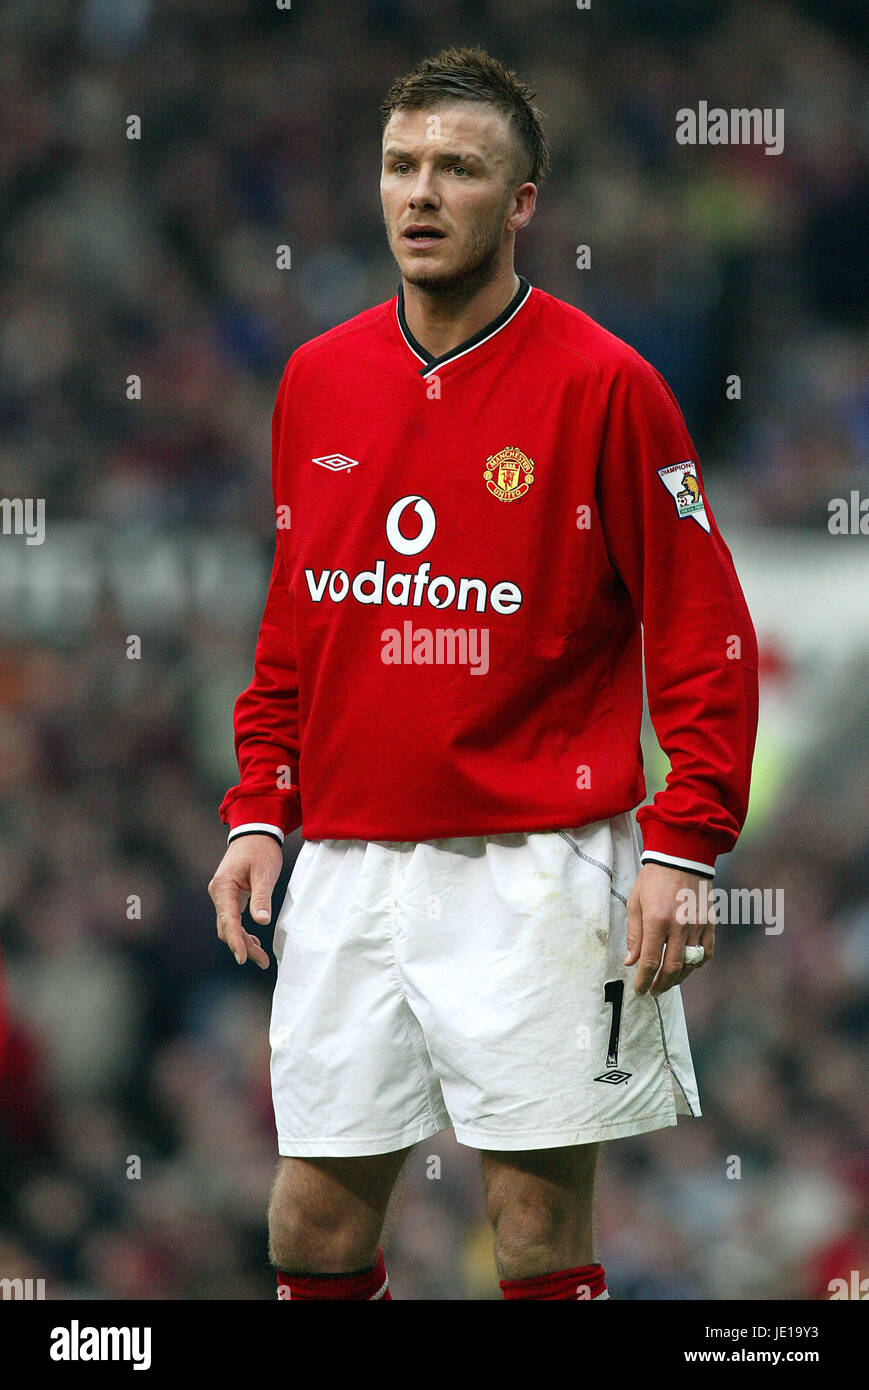 DAVID BECKHAM MANCHESTER UNITED FC OLD TRAFFORD MANCHESTER 23 March 2002  Stock Photo - Alamy